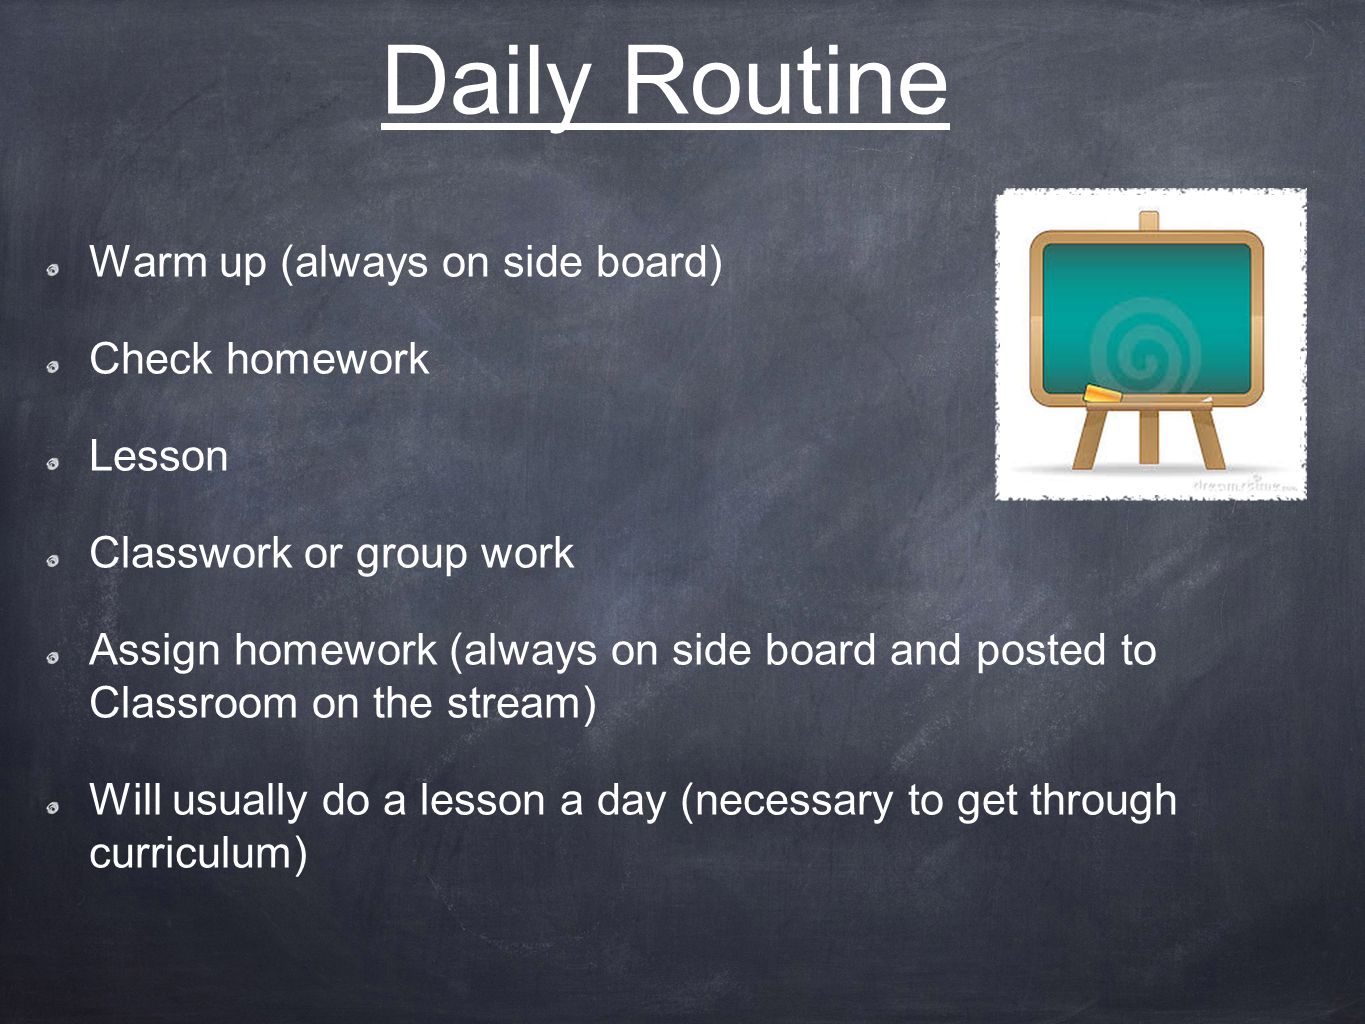 Daily Routine Warm up (always on side board) Check homework Lesson Classwork or group work Assign homework (always on side board and posted to Classroom on the stream) Will usually do a lesson a day (necessary to get through curriculum)